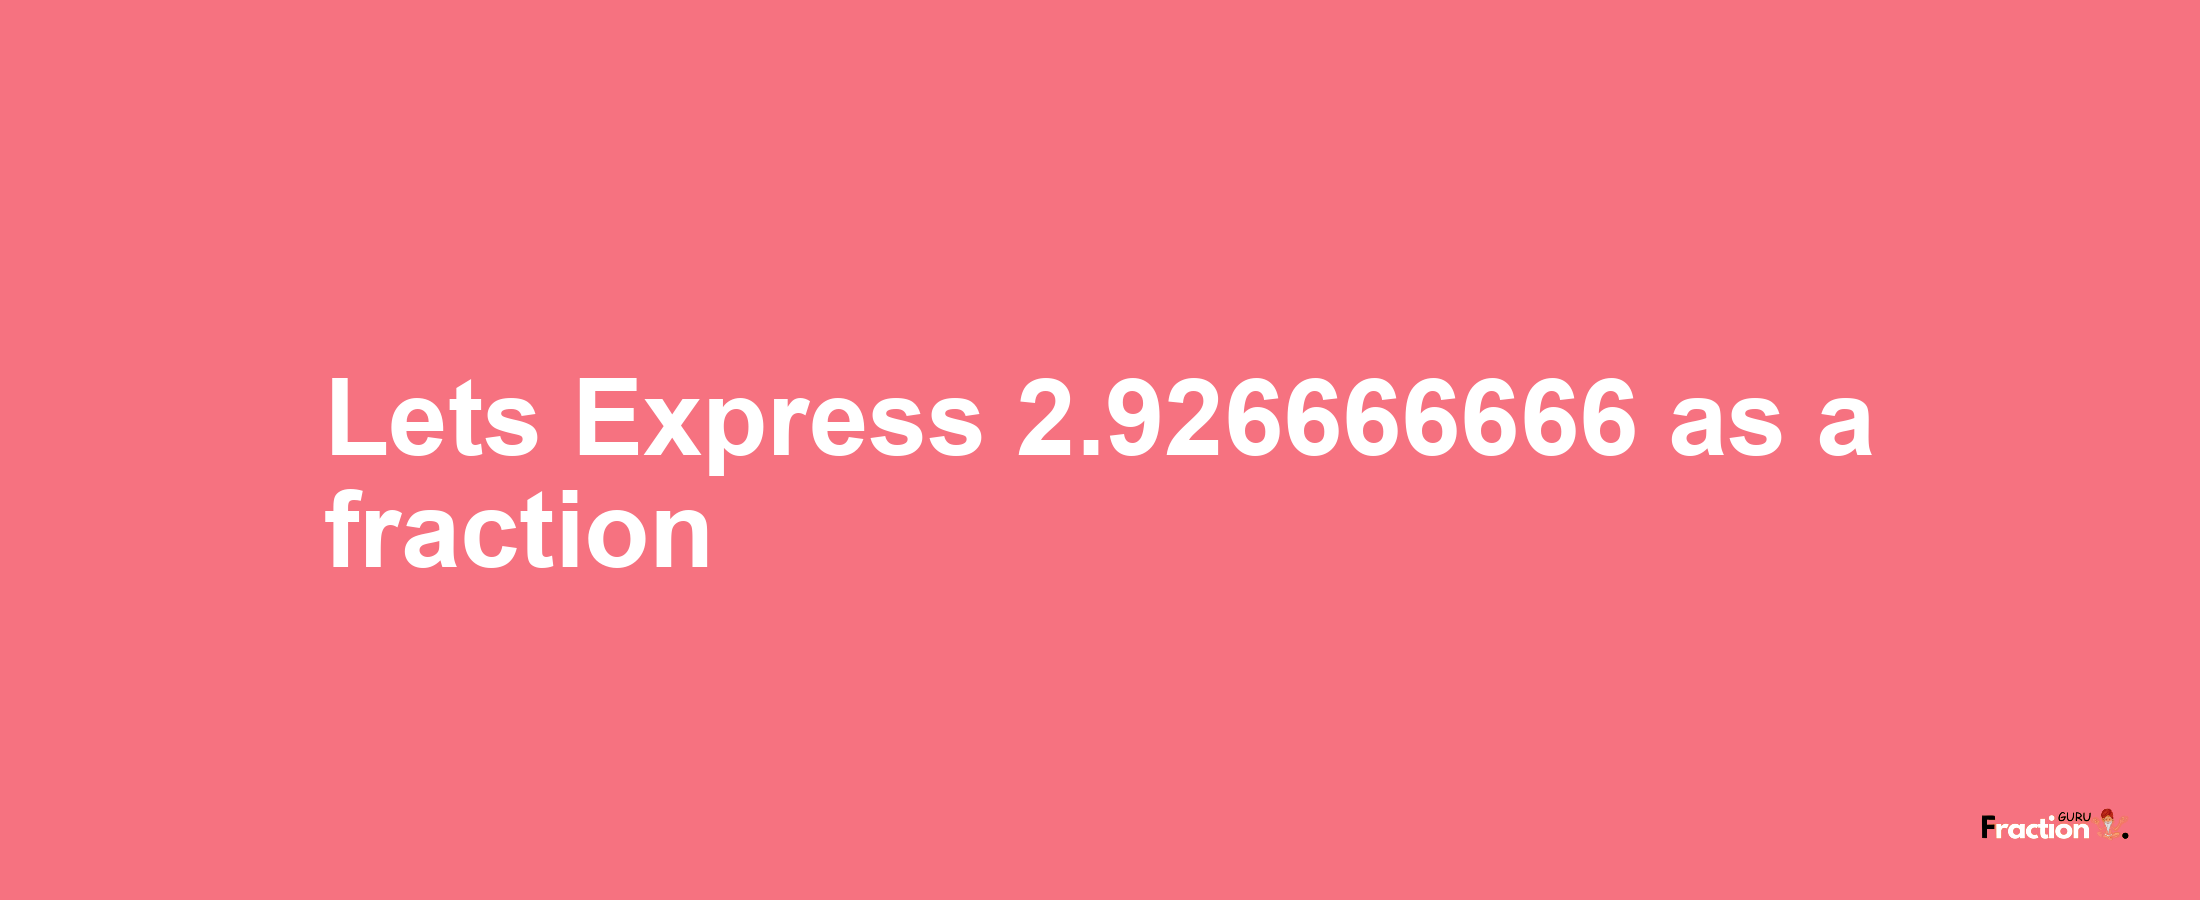 Lets Express 2.926666666 as afraction